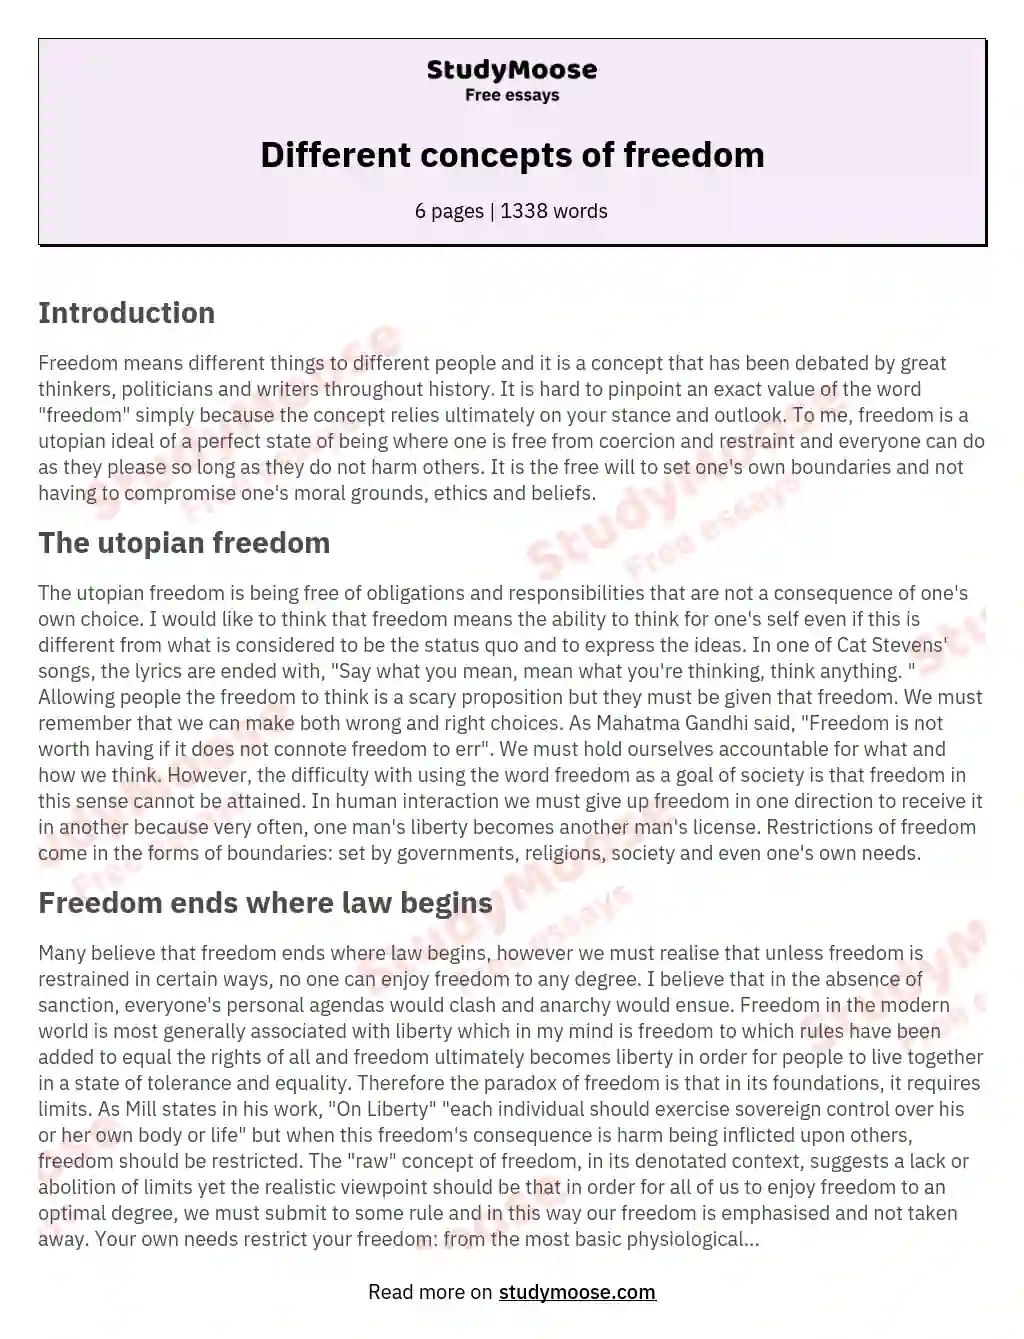 Different concepts of freedom essay